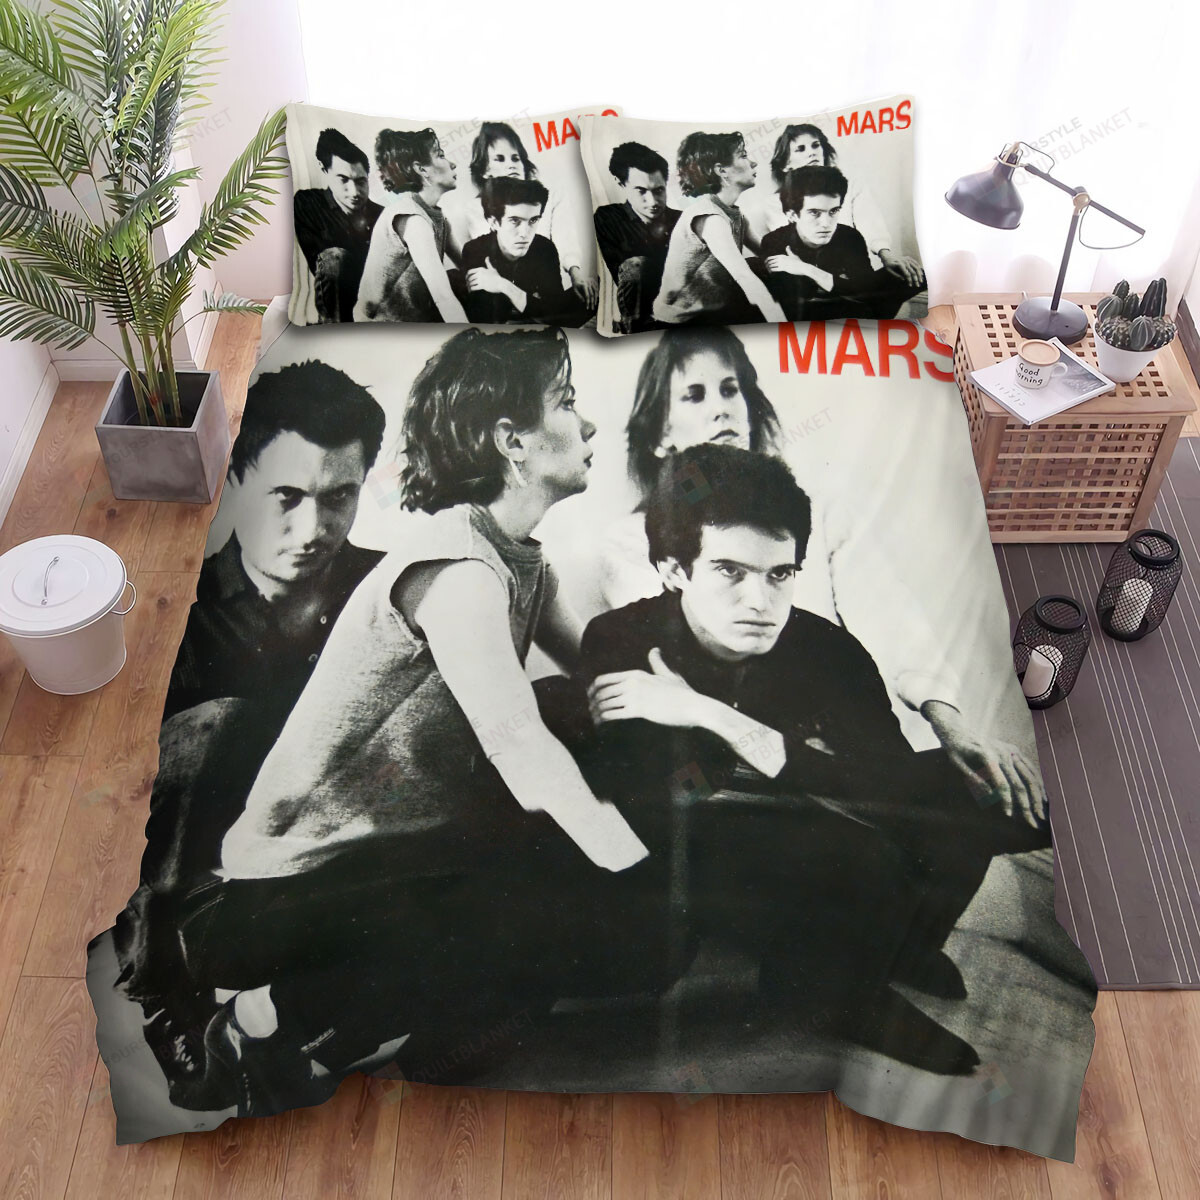 Mars Band Photo In Black & White Bed Sheets Spread Comforter Duvet Cover Bedding Sets